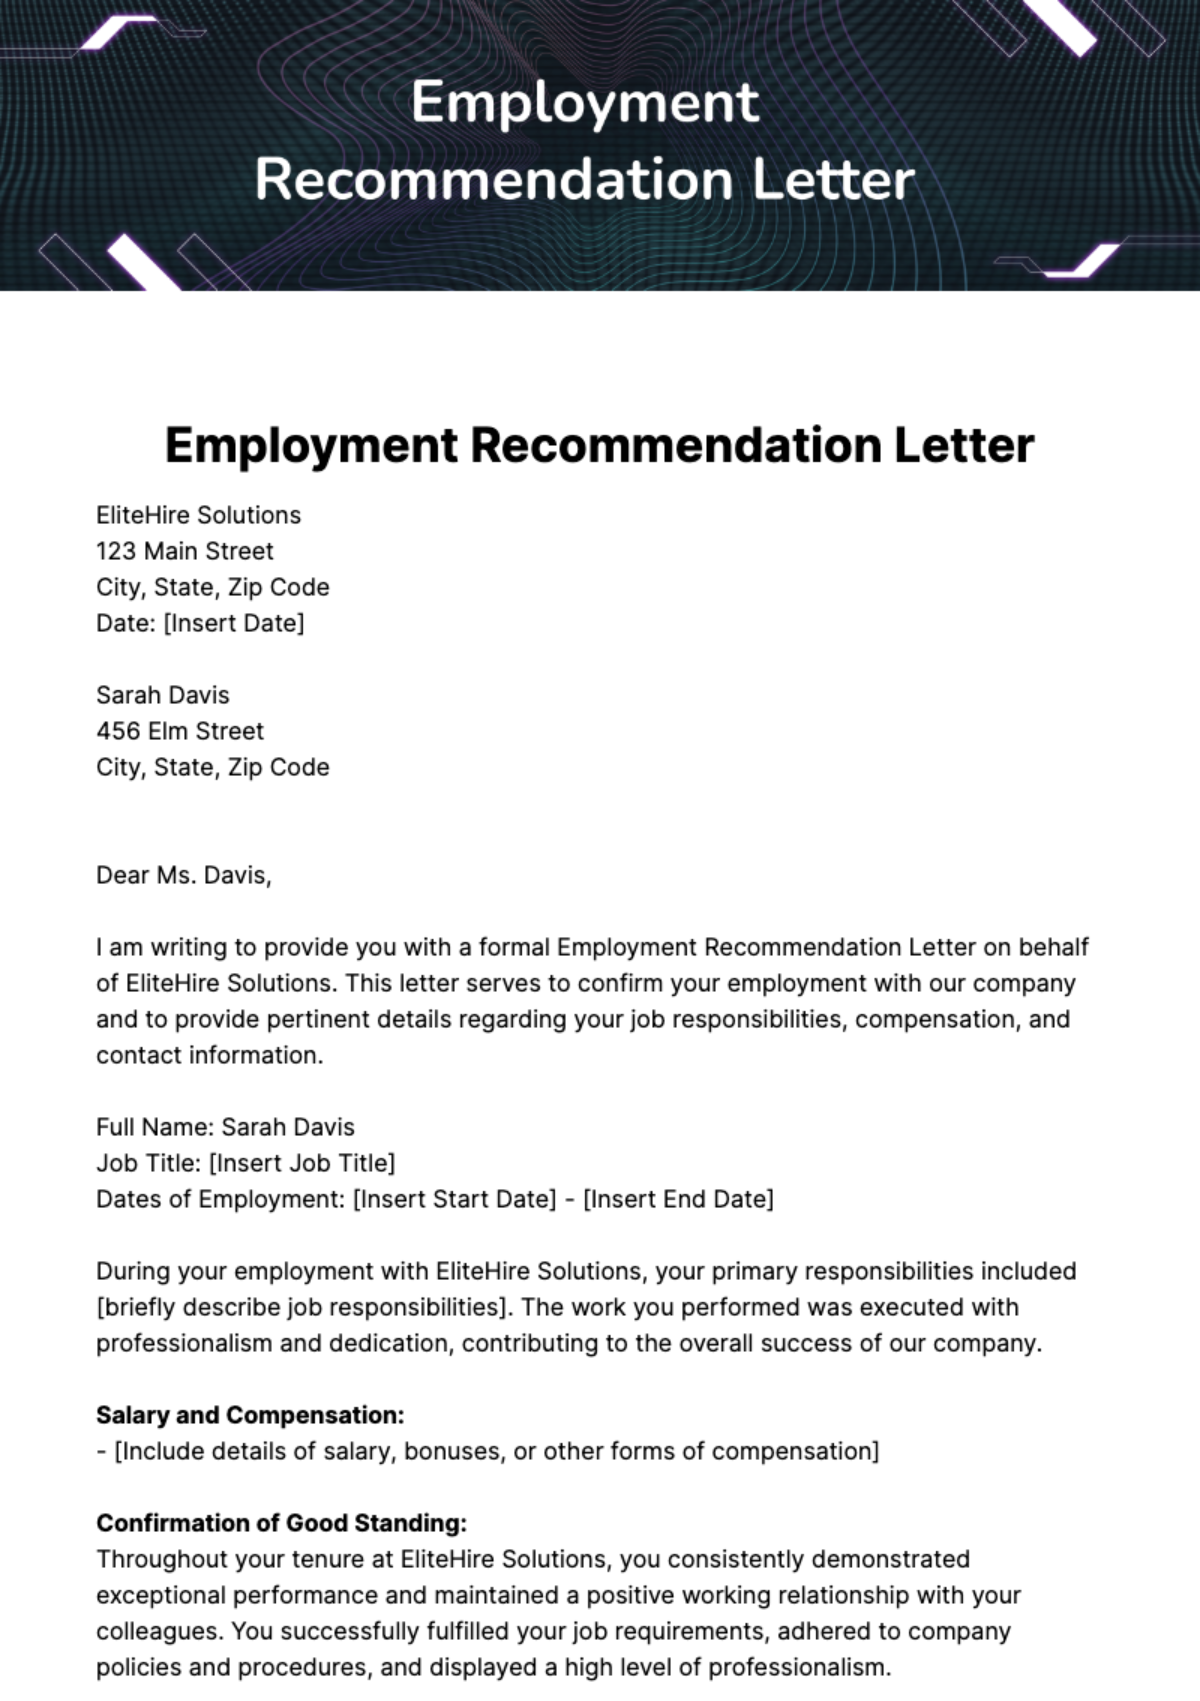 Employment Recommendation Letter Template